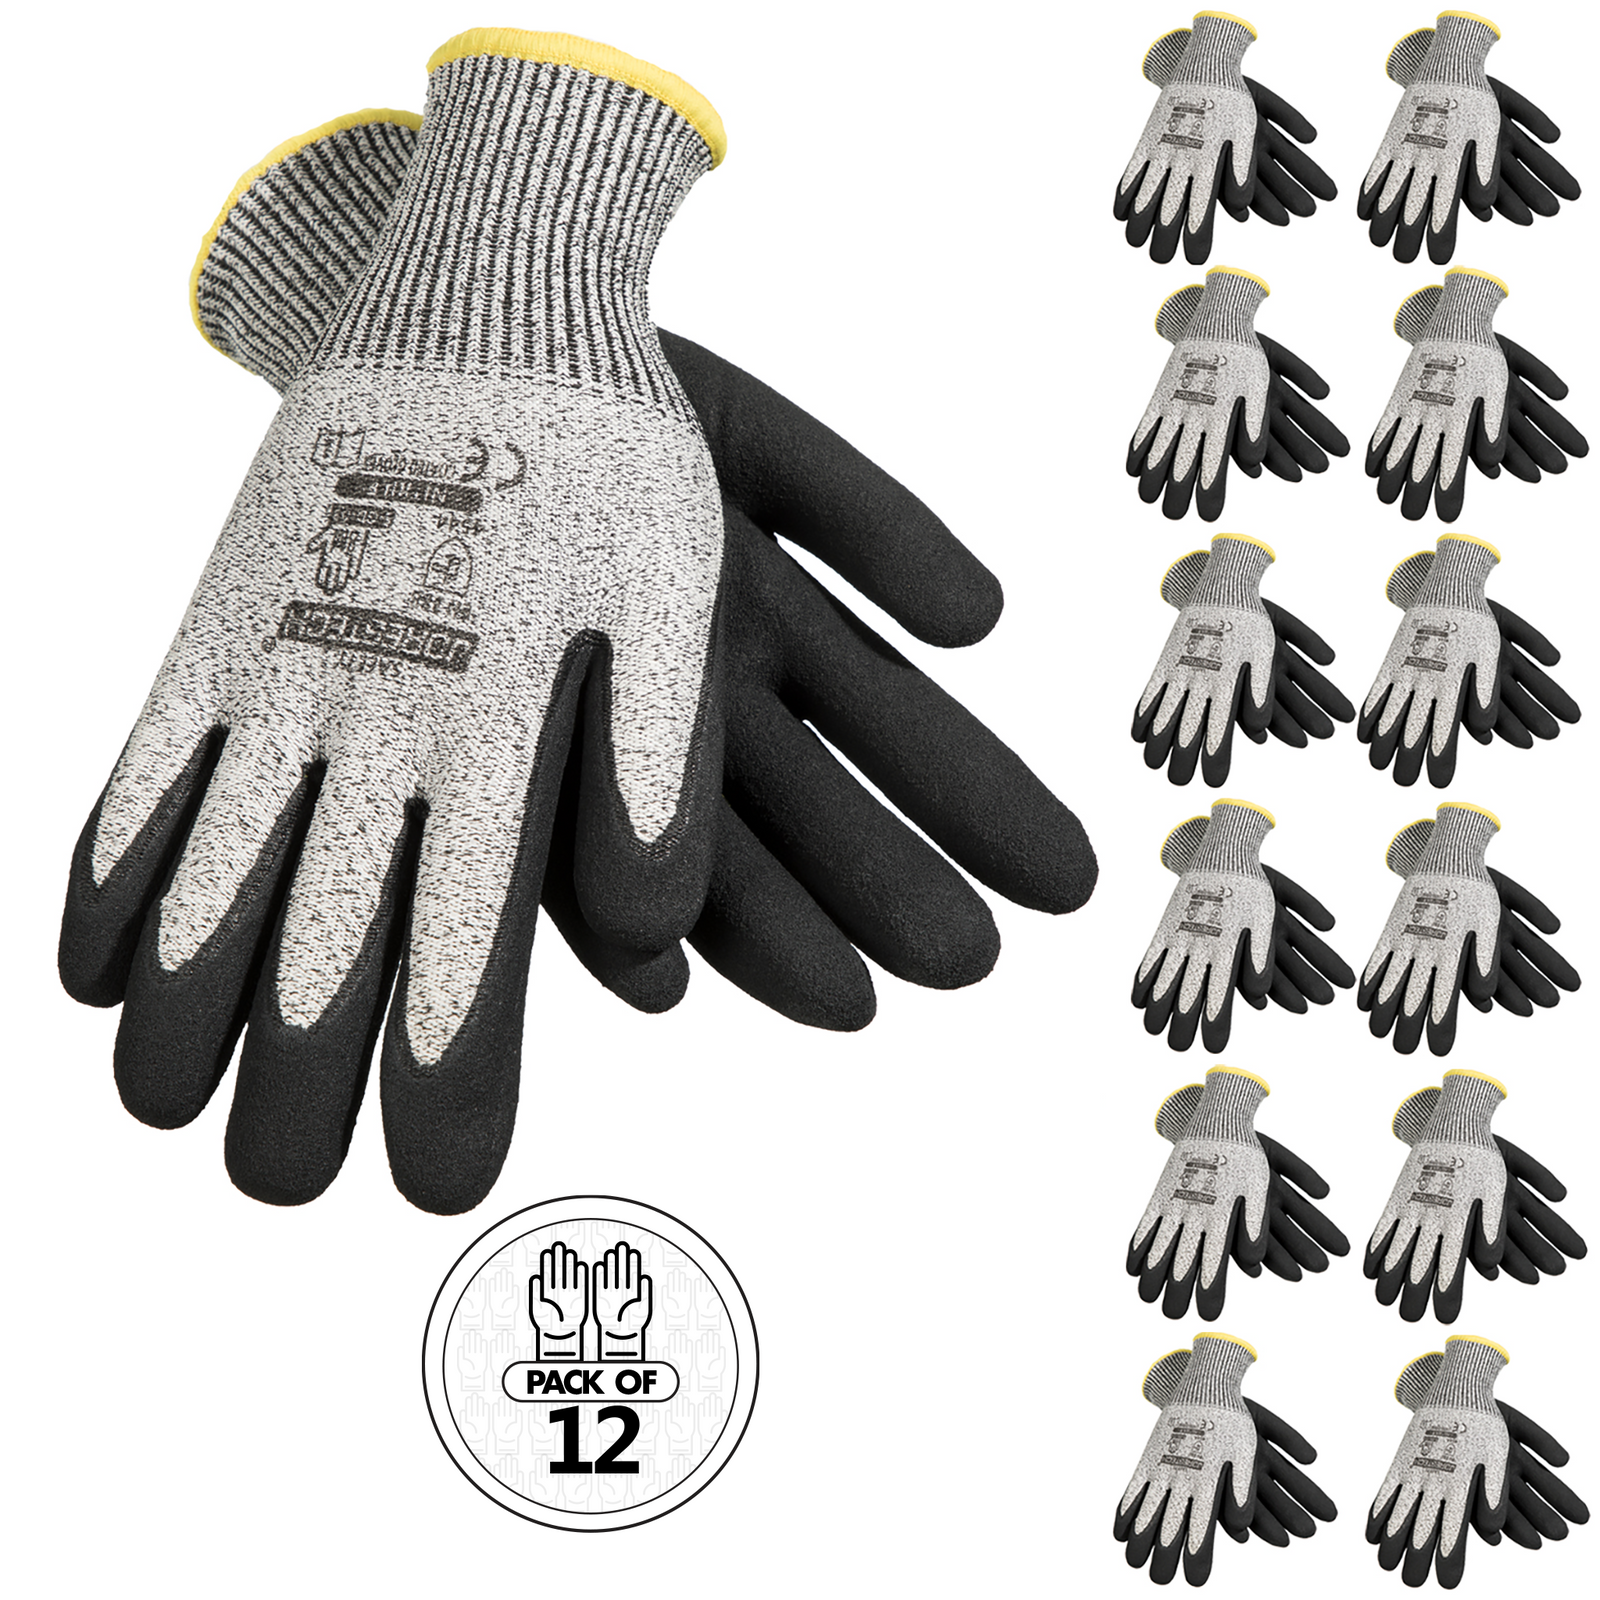 Cut Resistant Glove with PU Palm - LIFT Safety